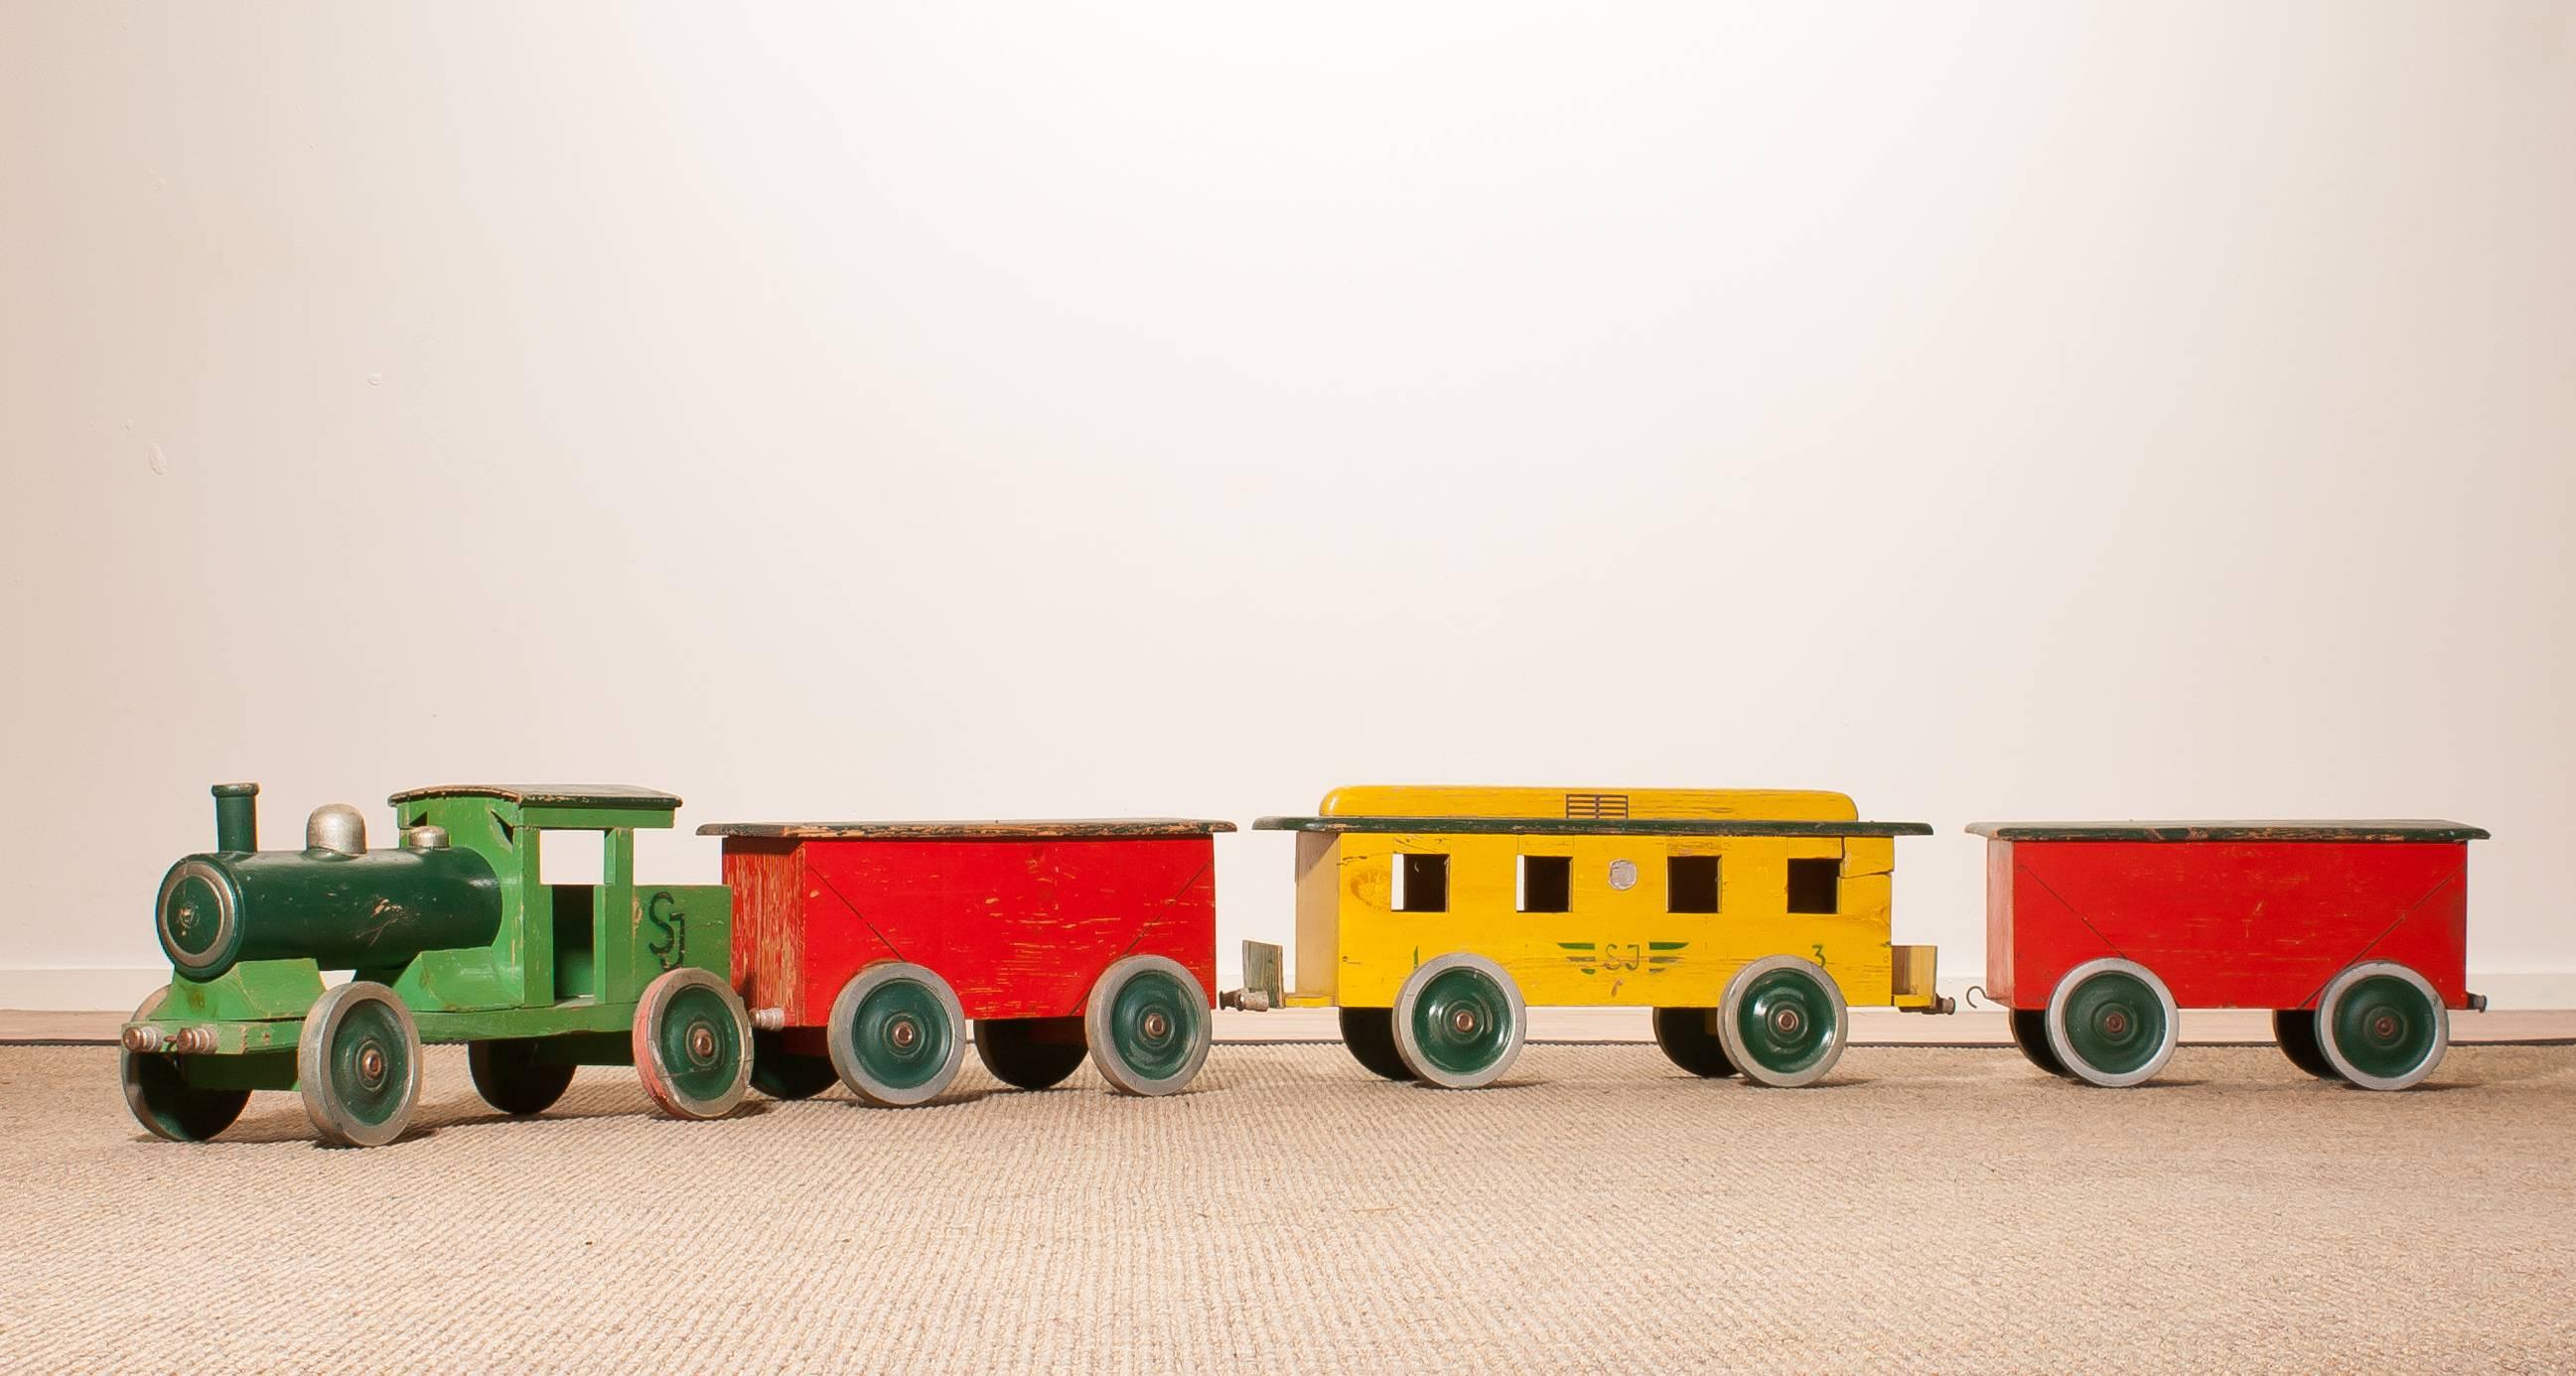 Very adoring large wooden toy train.
This fun train consists of three carriages and a locomotive.
The train is made of pine wood and tagged with a punched plate with 'Torsha Traindustri '.
It is in a nice used condition,
Period